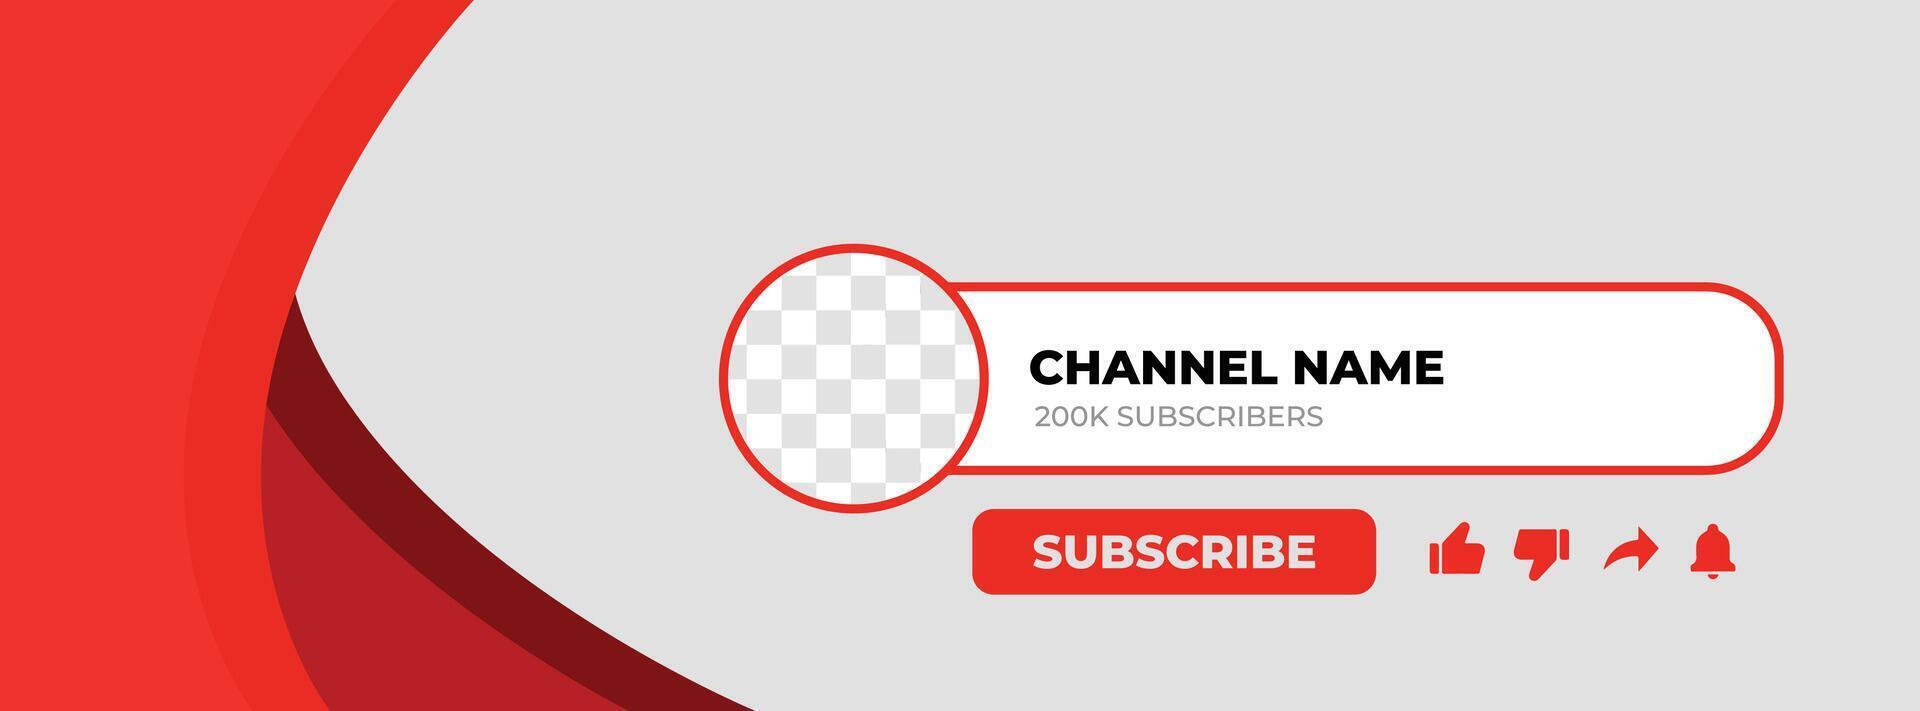 Youtube Channel Name Lower Third. Red Broadcast Banner for Video vector